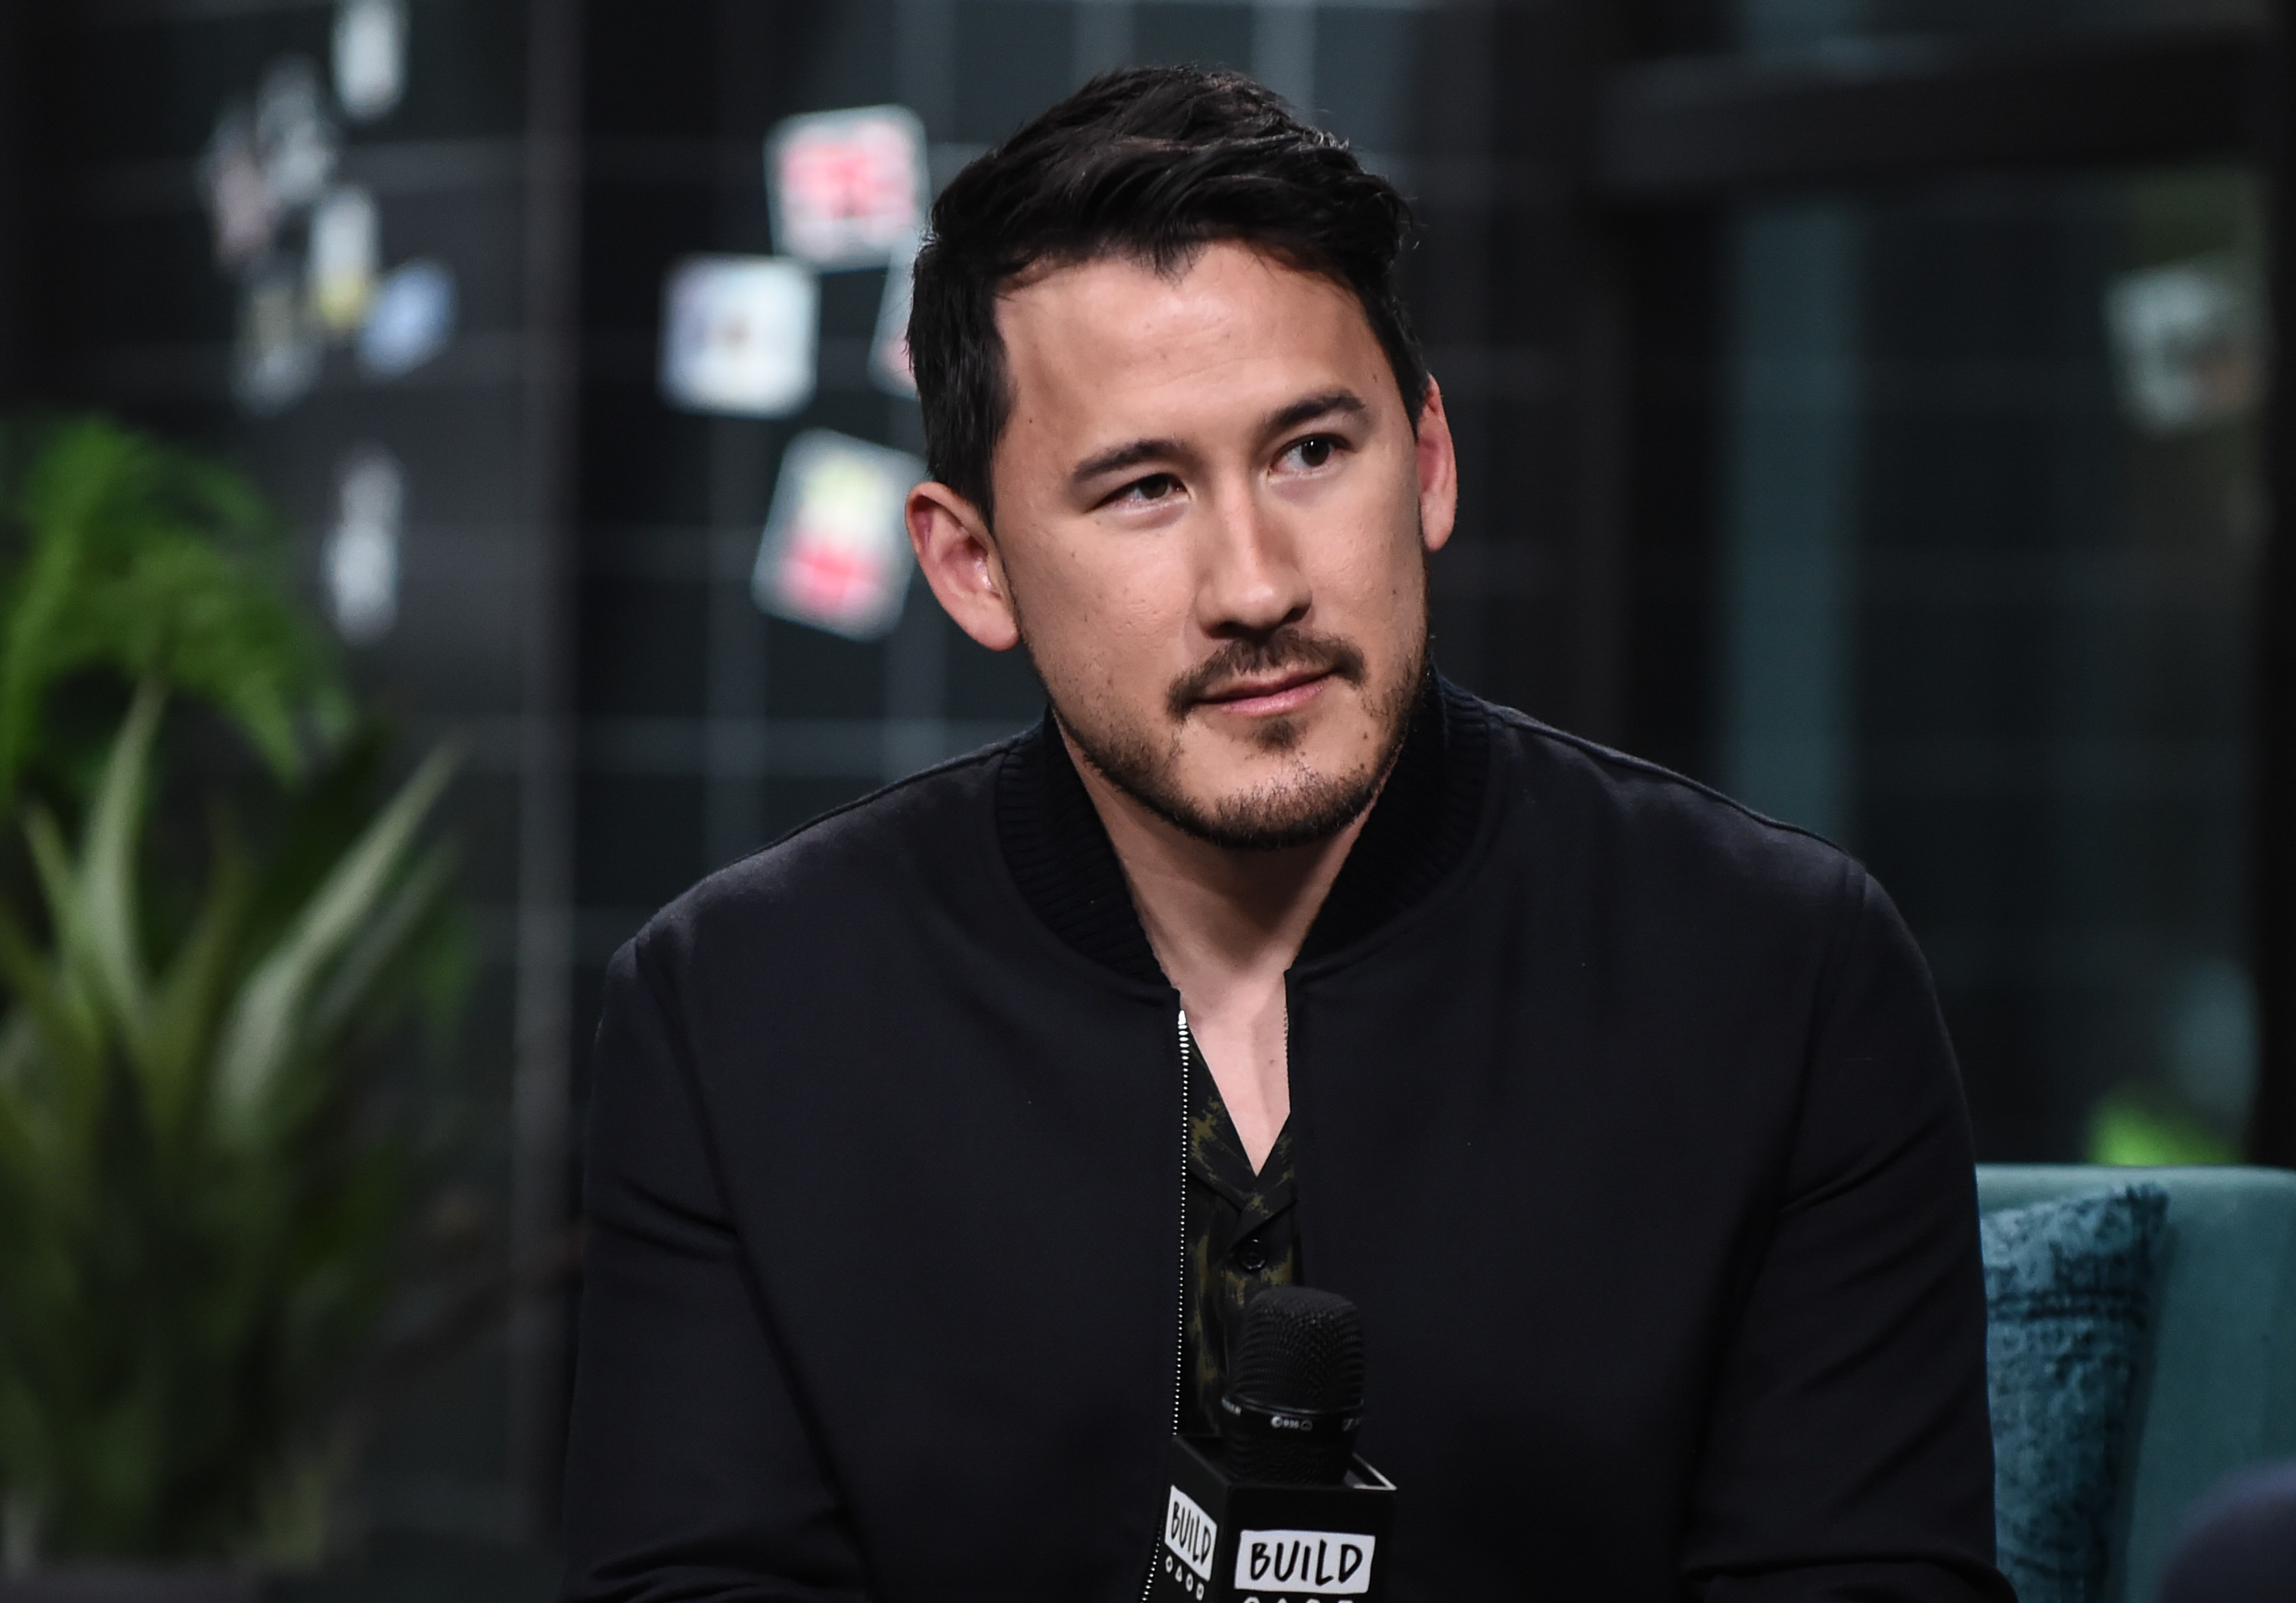 YouTuber Mark Edward Fischbach aka Markiplier attends the Build Series to discuss his new game “A Heist with Markiplier” at Build Studio on November 12, 2019 in New York City